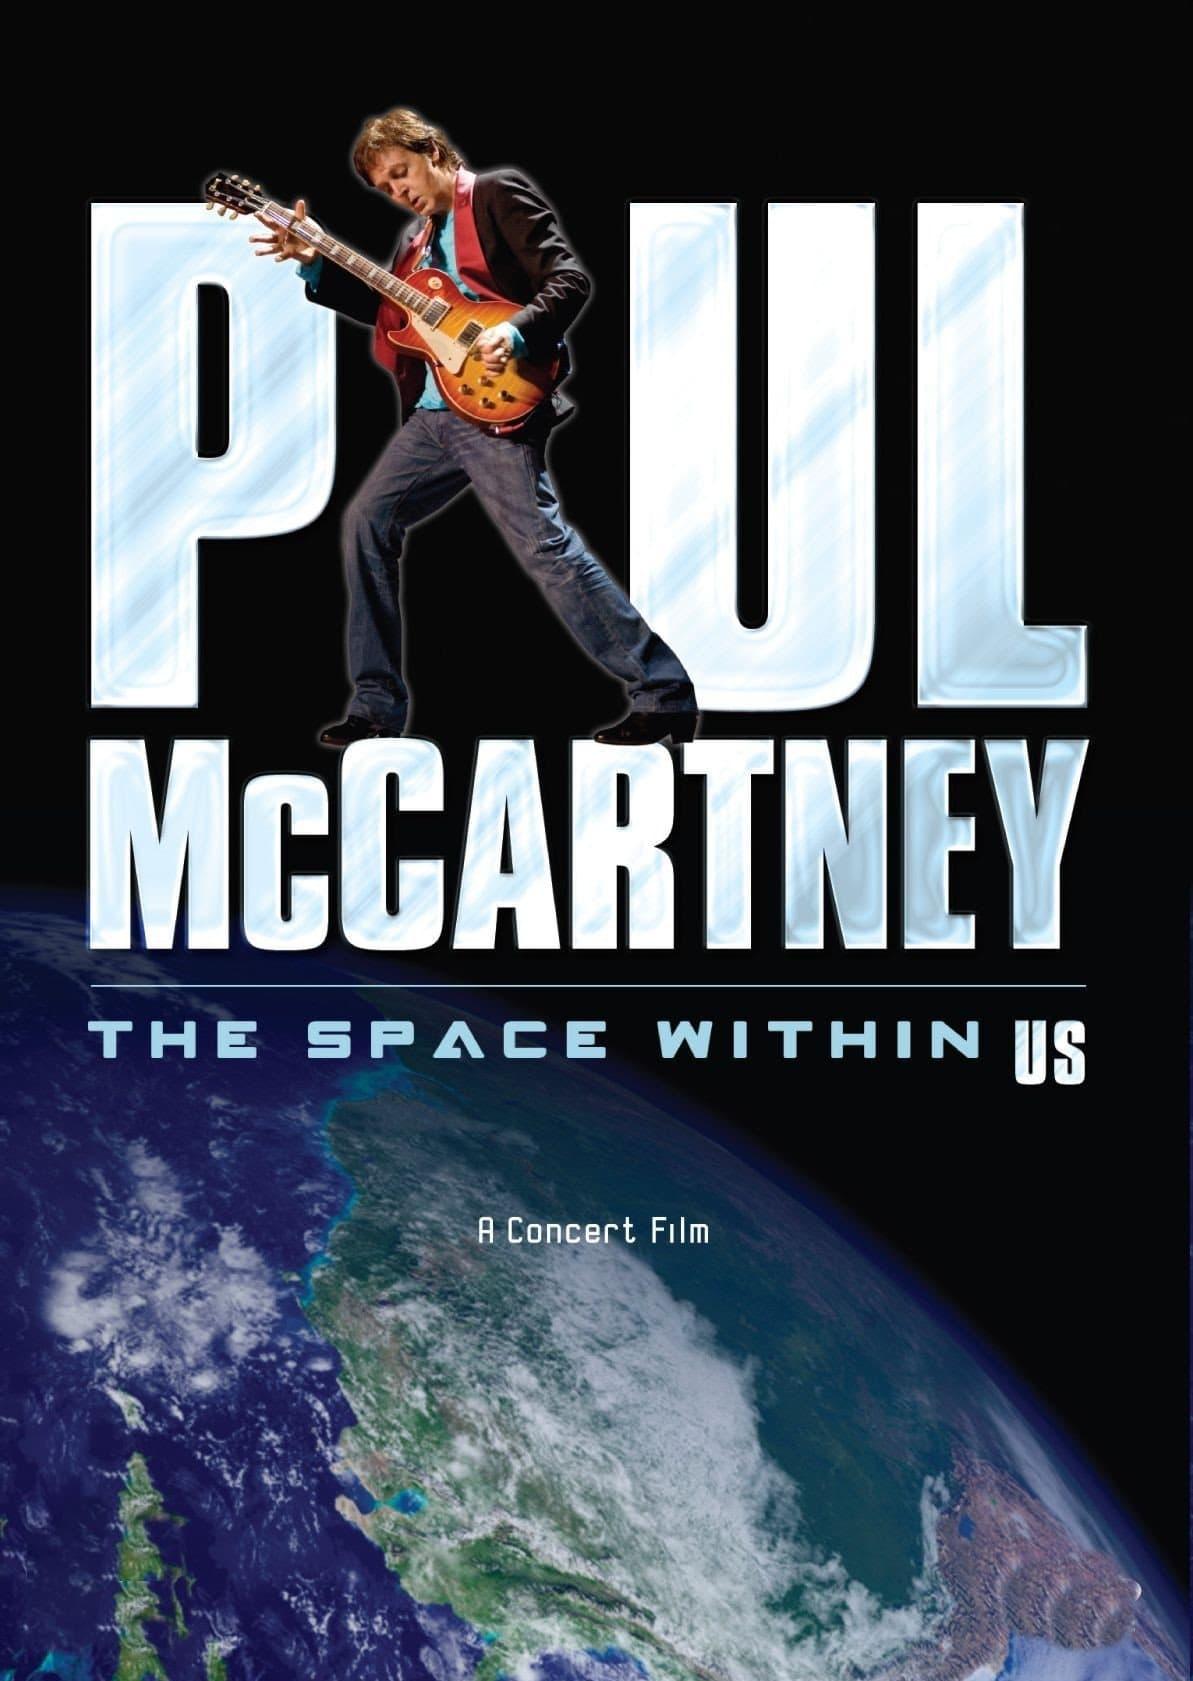 Paul McCartney: The Space Within Us poster